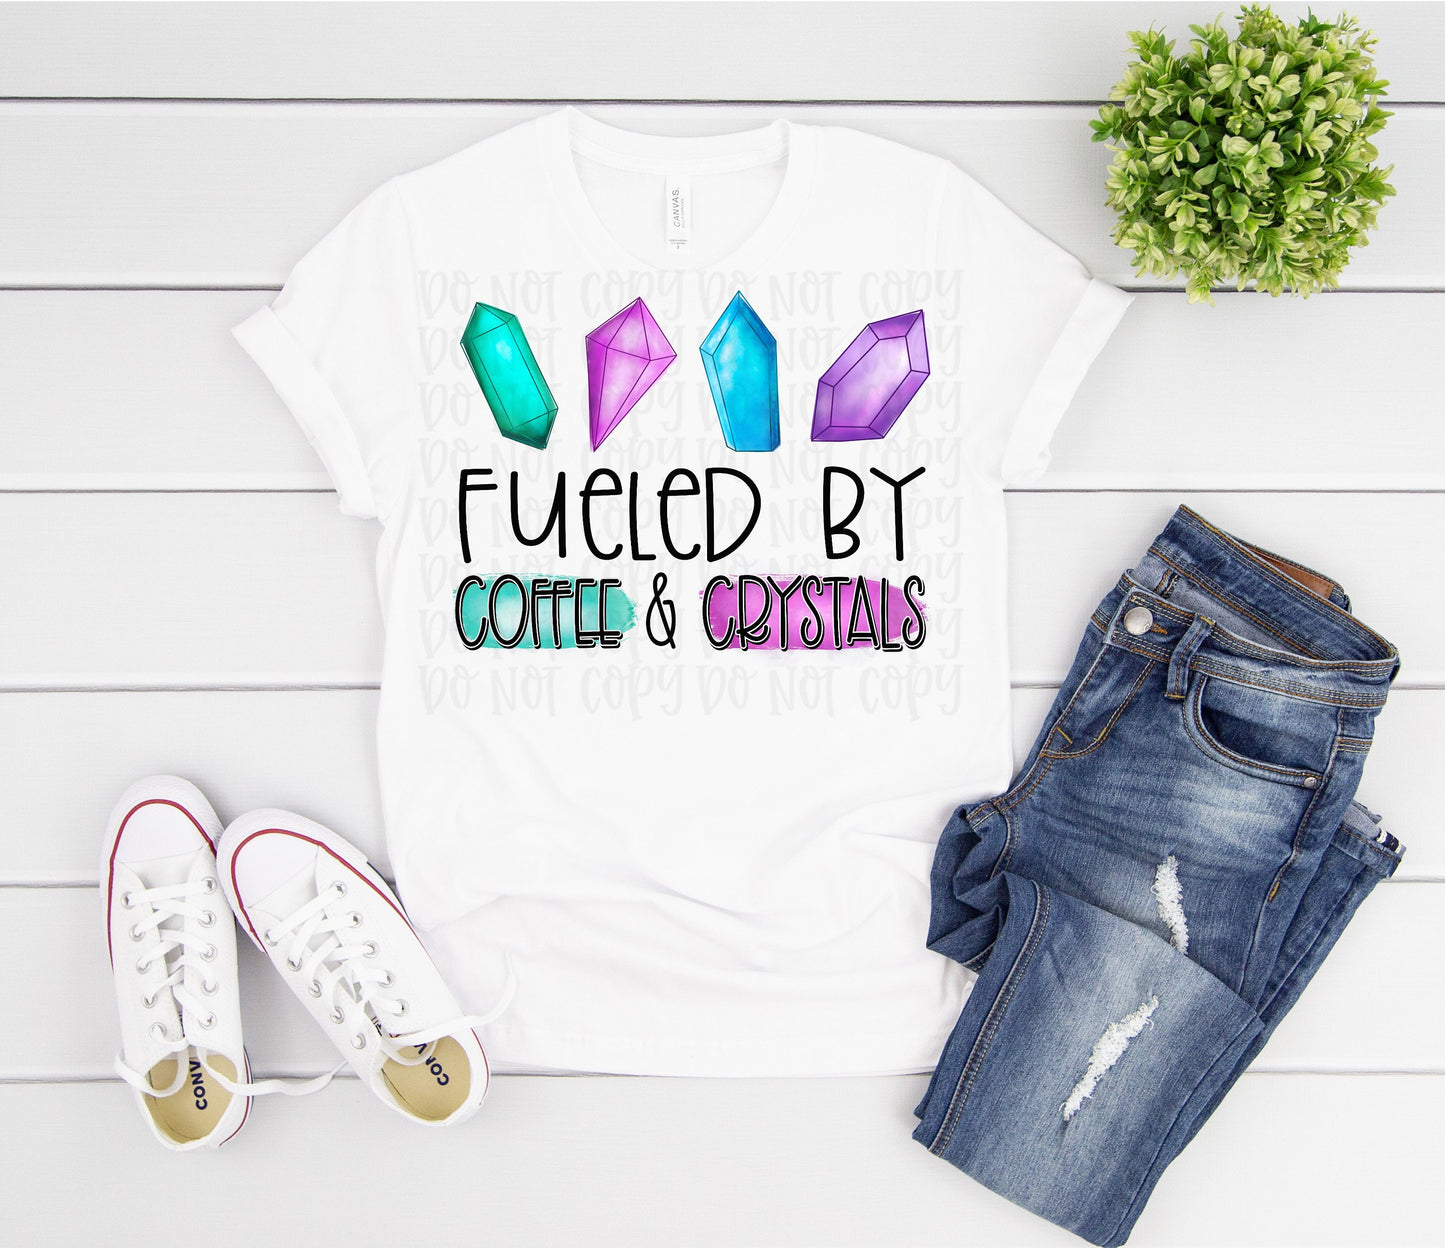 Fueled by coffee & crystals